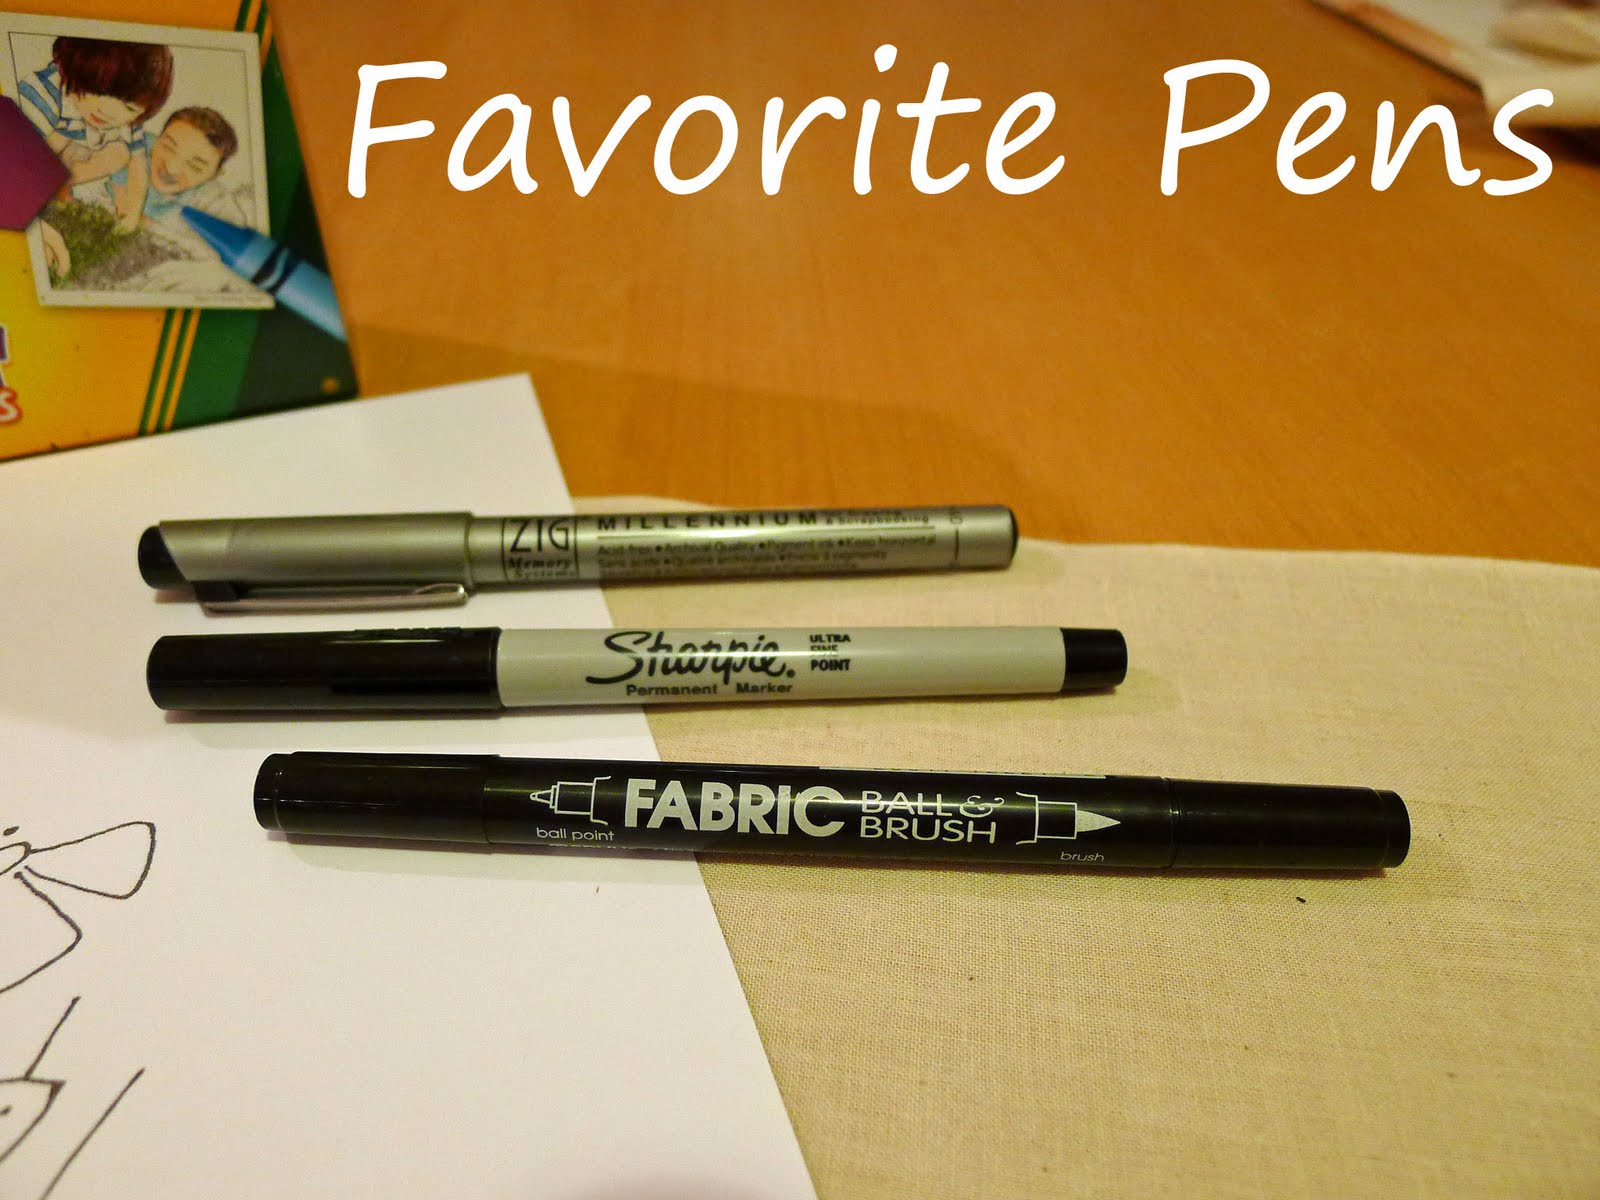 Pieces by Polly: Pen Options for Faux Embroidery